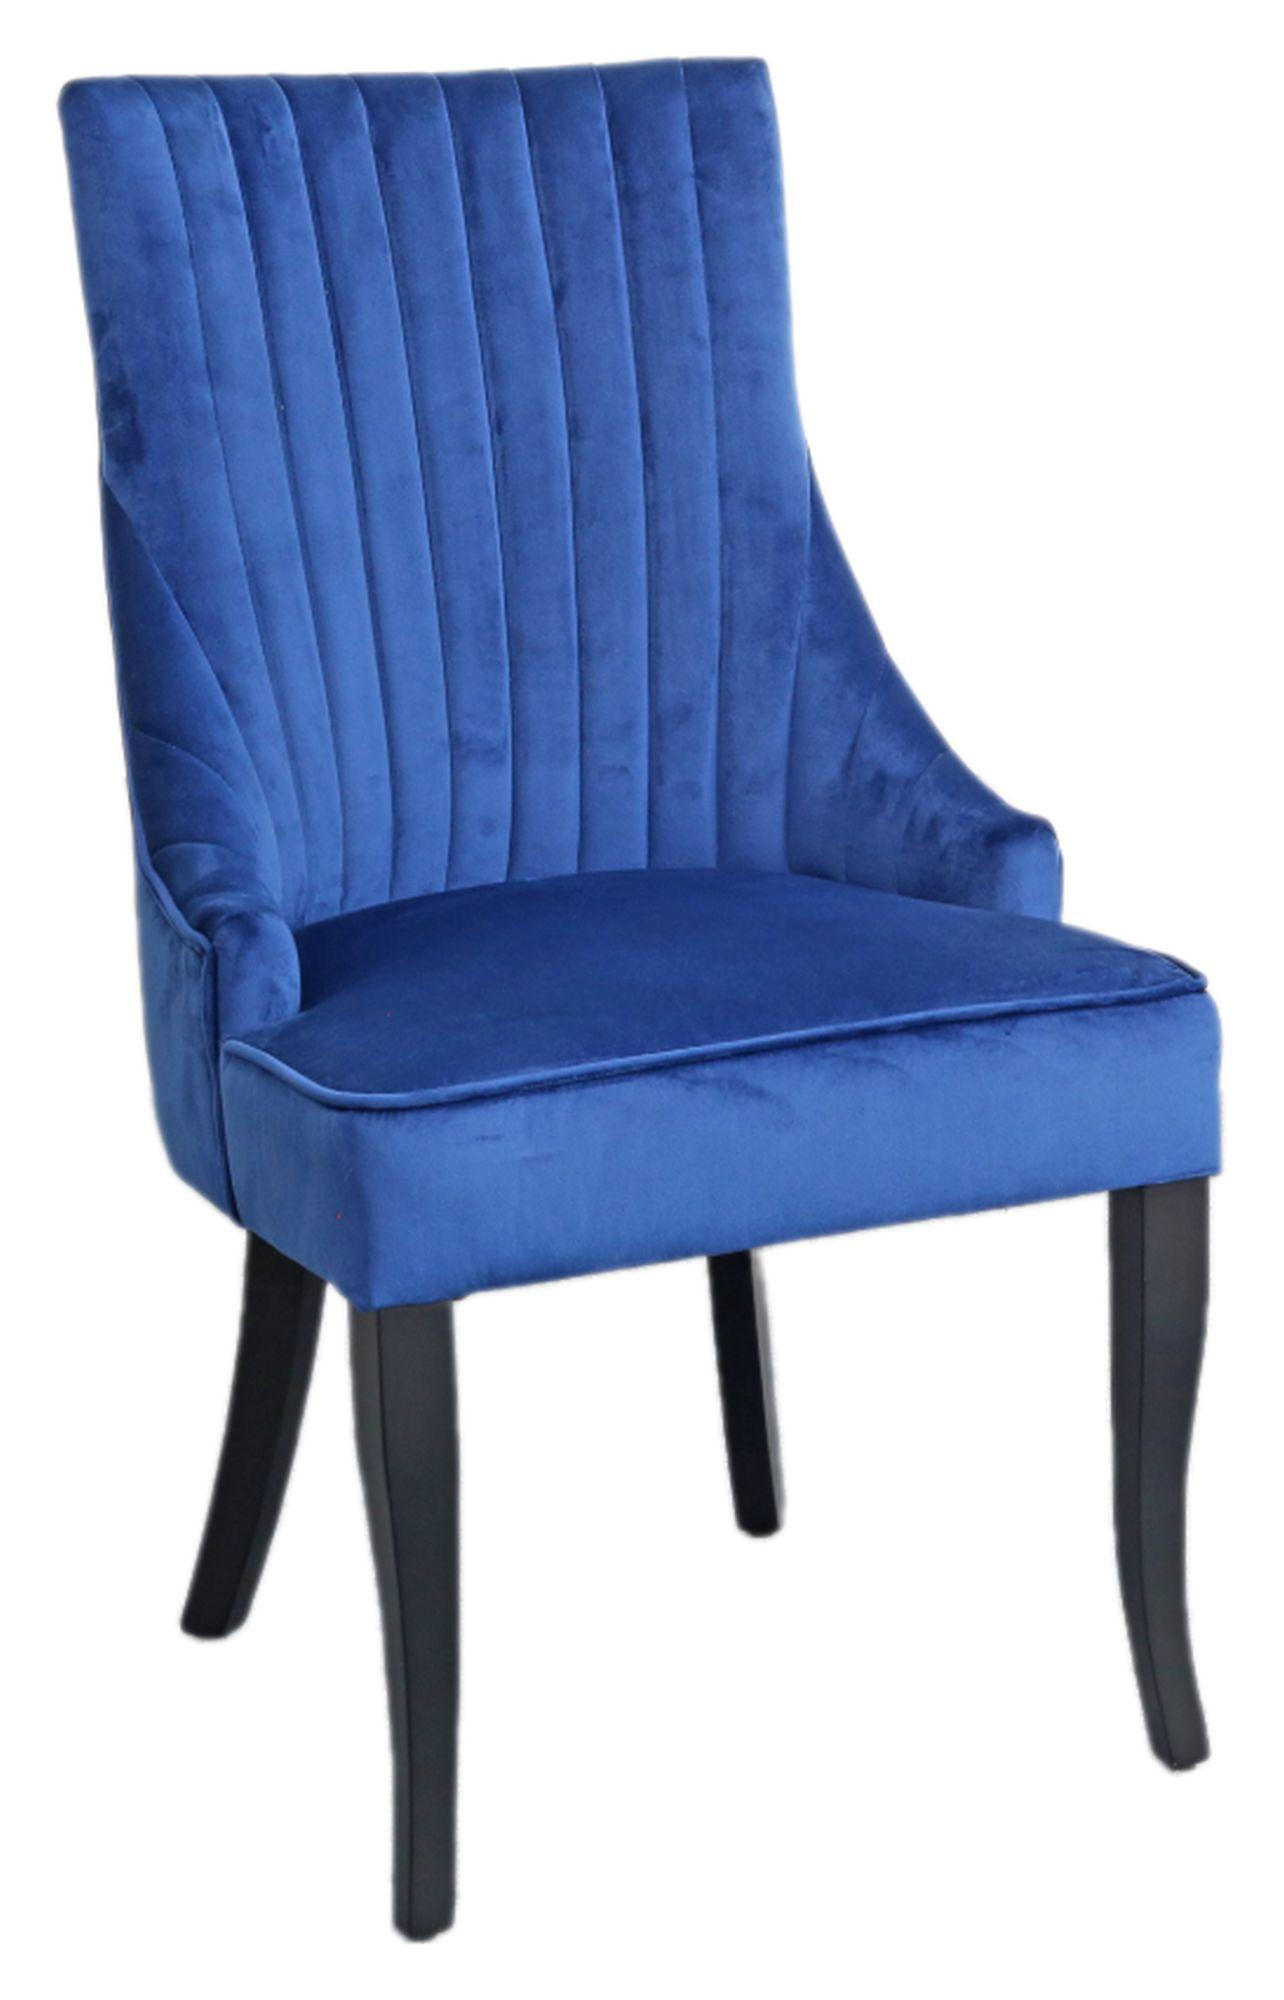 Sofie Blue Dining Chair, Tufted Velvet Fabric Upholstered with Black Wooden Legs